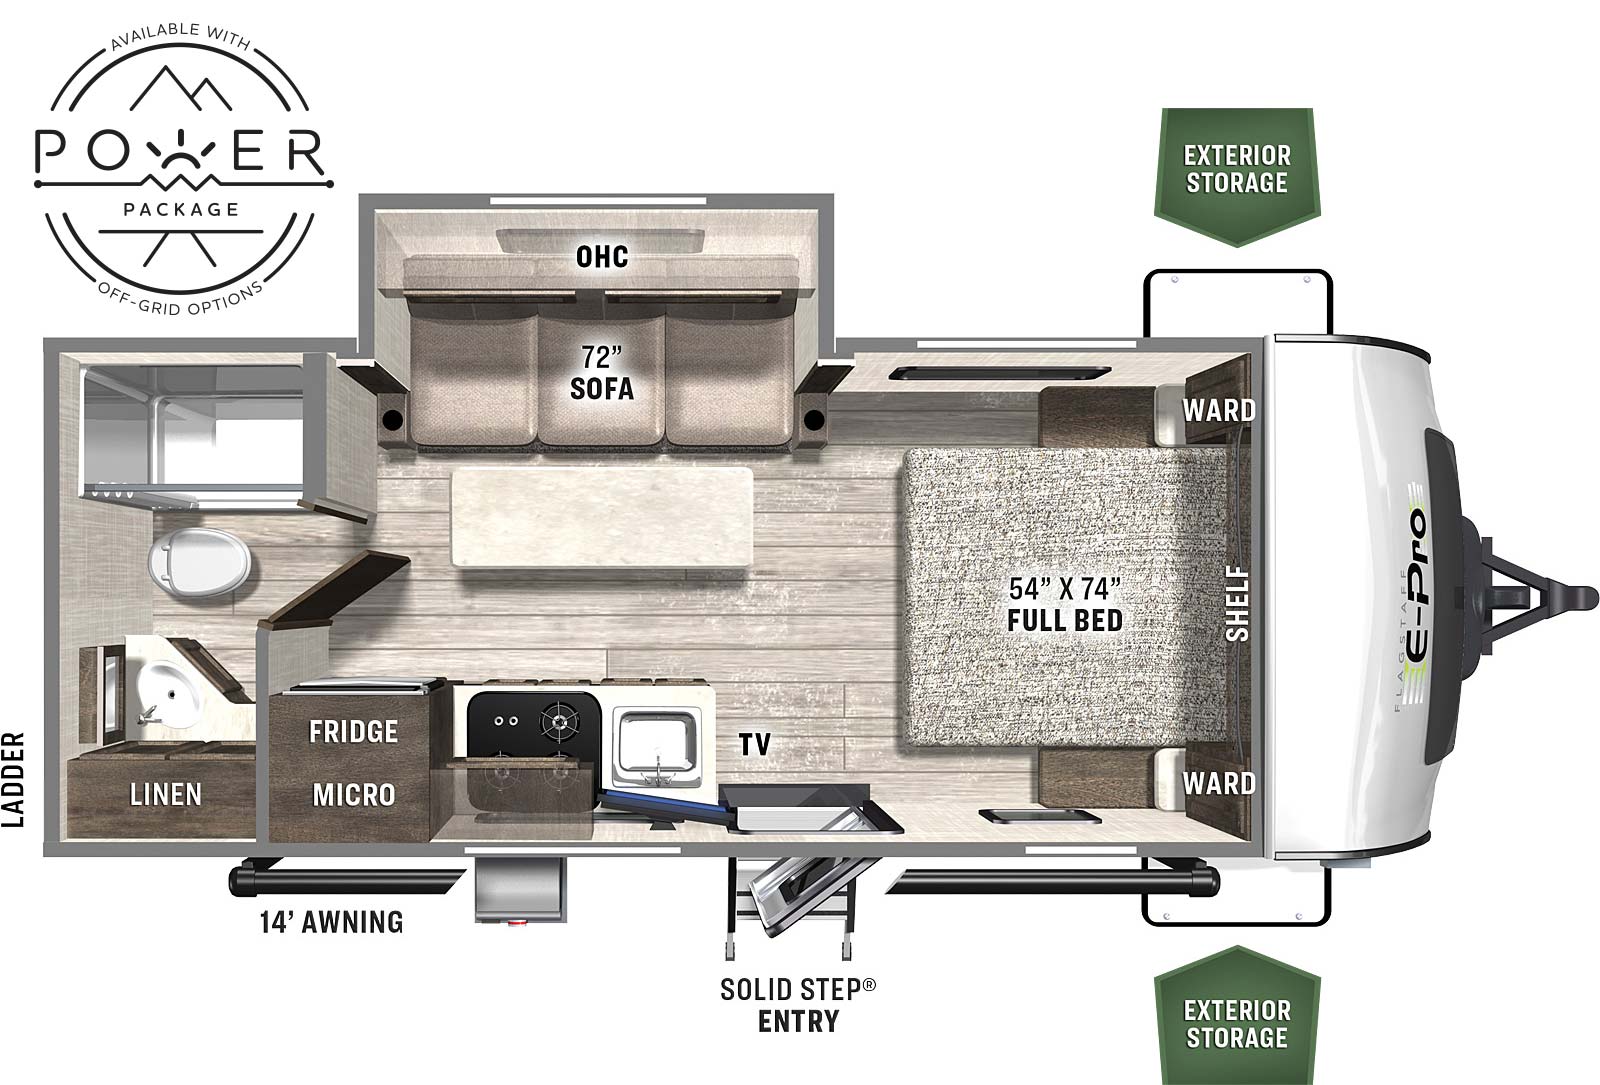 The E20FBS has 1 slide out and 1 entry door. Exterior features include exterior storage, a rear ladder, and a 14 foot awning. Interior layout from front to back: front bedroom with foot facing 54x74 full bed; off-door side slide out containing sofa; door side kitchen countertop with refrigerator, microwave, cooktop stove, overhead cabinet and single basin sink; and a full bathroom in the rear.